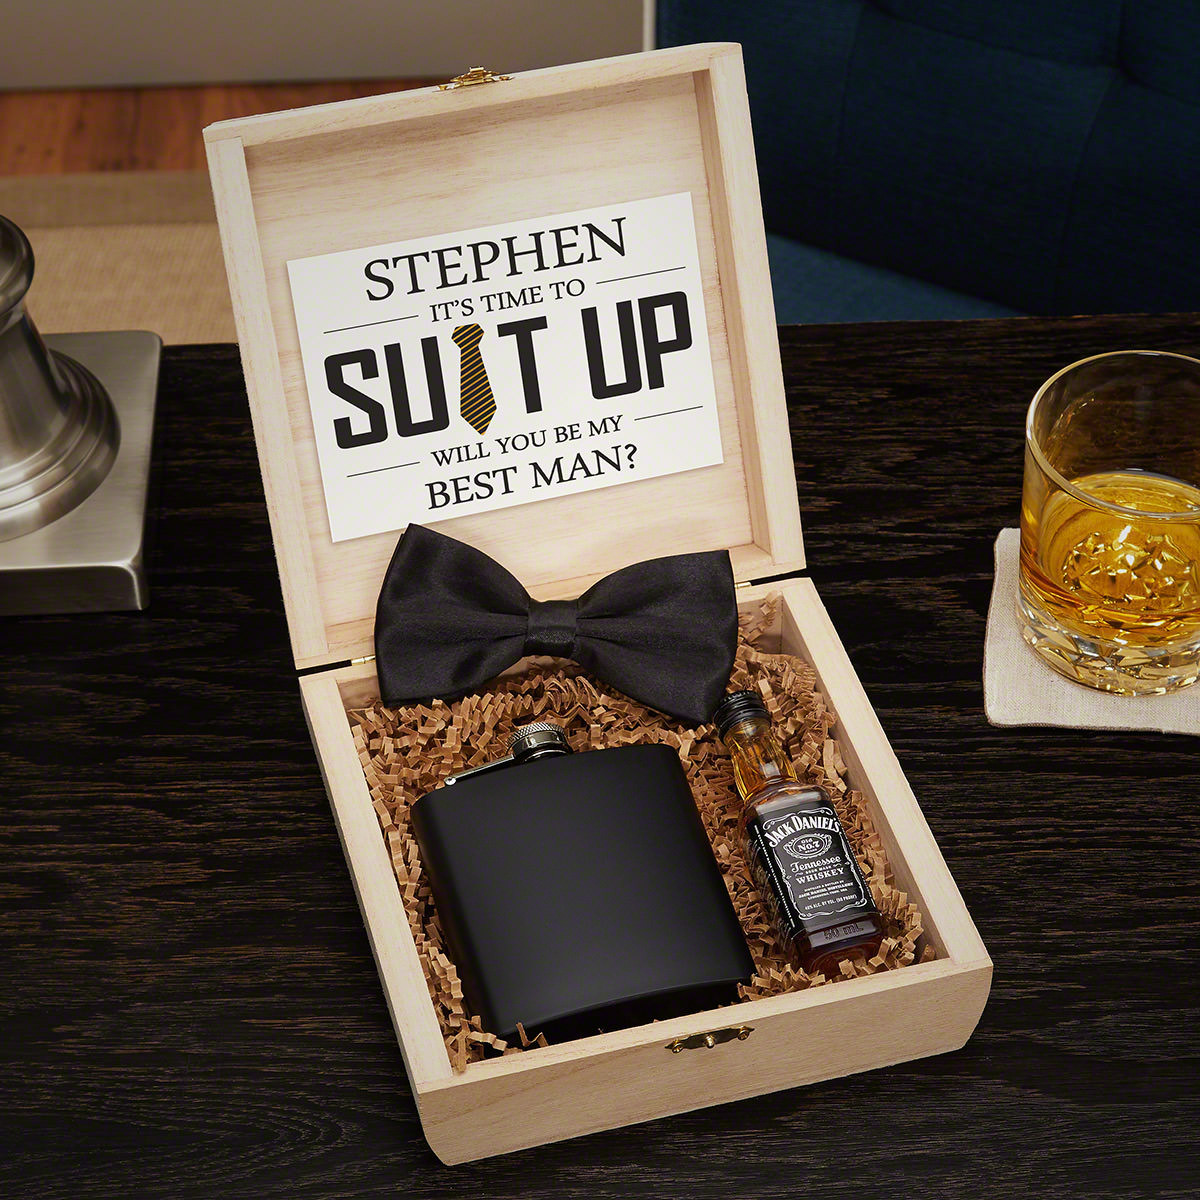 Wedding Party Gift Ideas For Guys
 Personalized Groomsmen Gifts and Wooden Crate Set